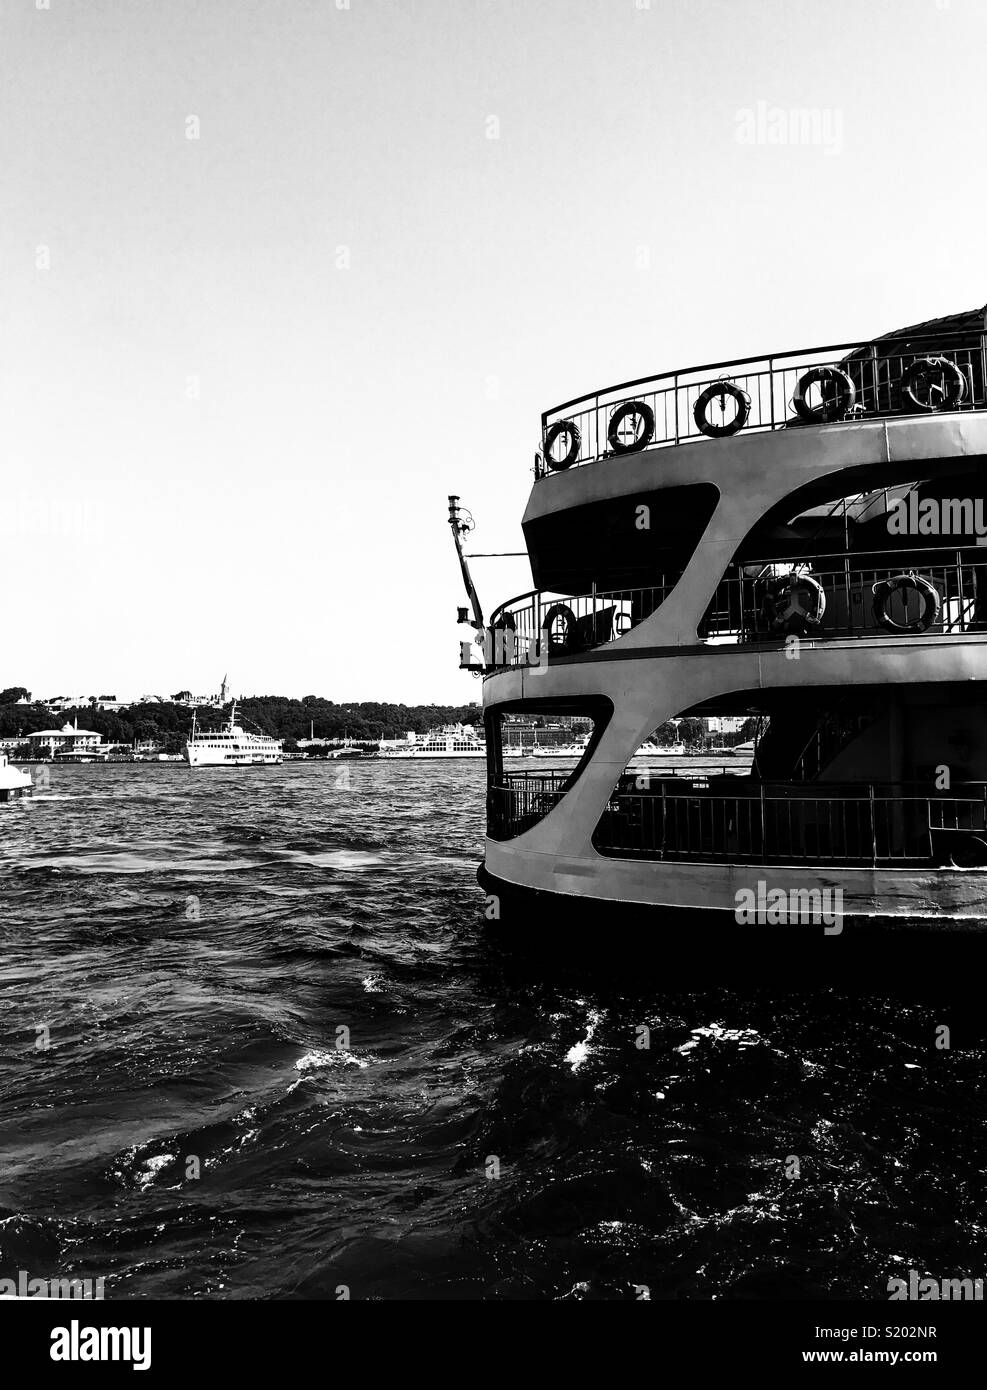 Beautiful istanbul Black and White Stock Photos & Images - Alamy